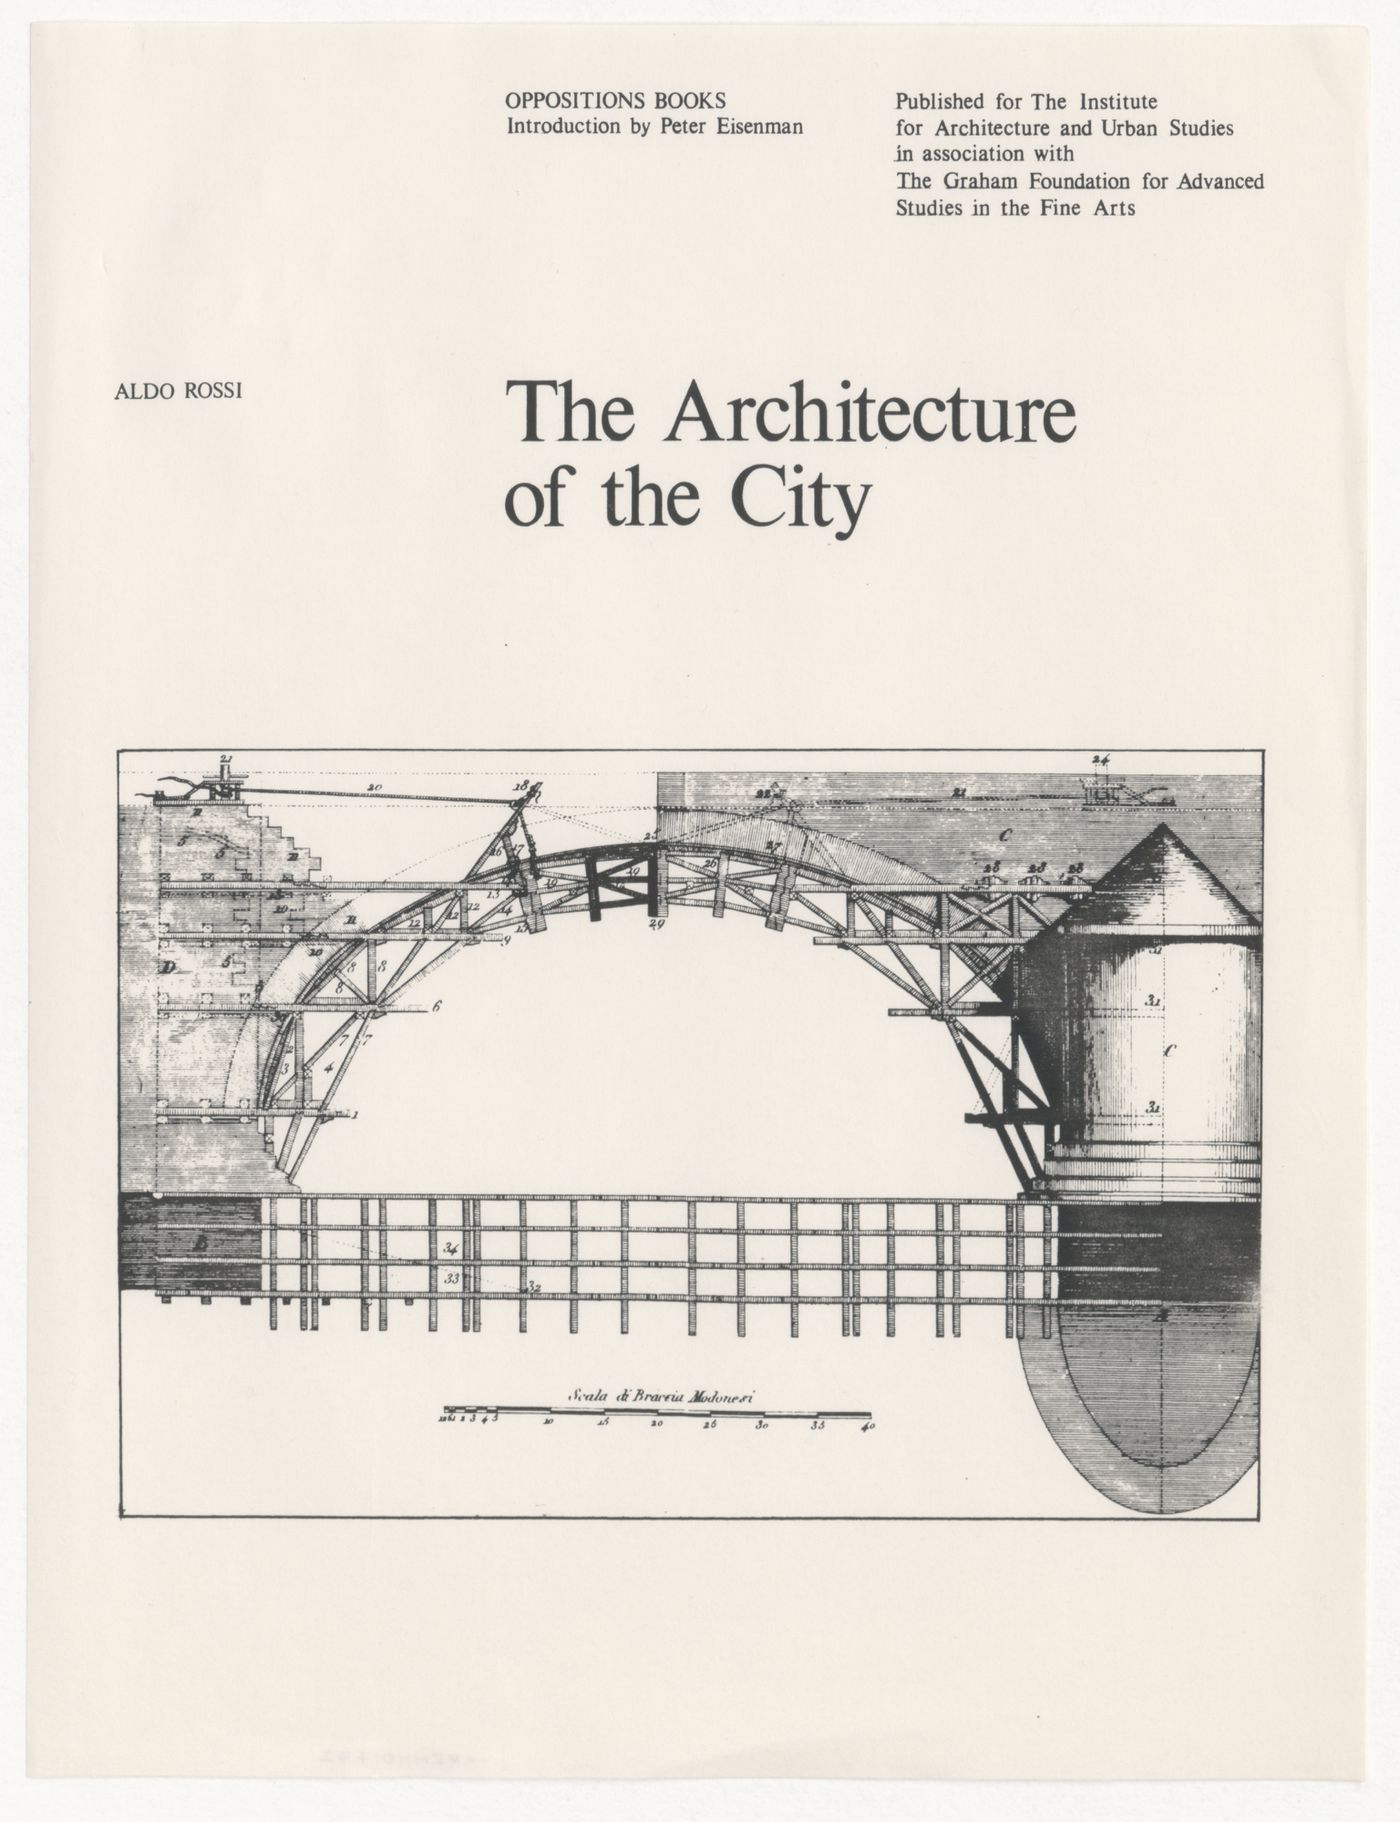 Title page for "The Architecture of the City" by Aldo Rossi